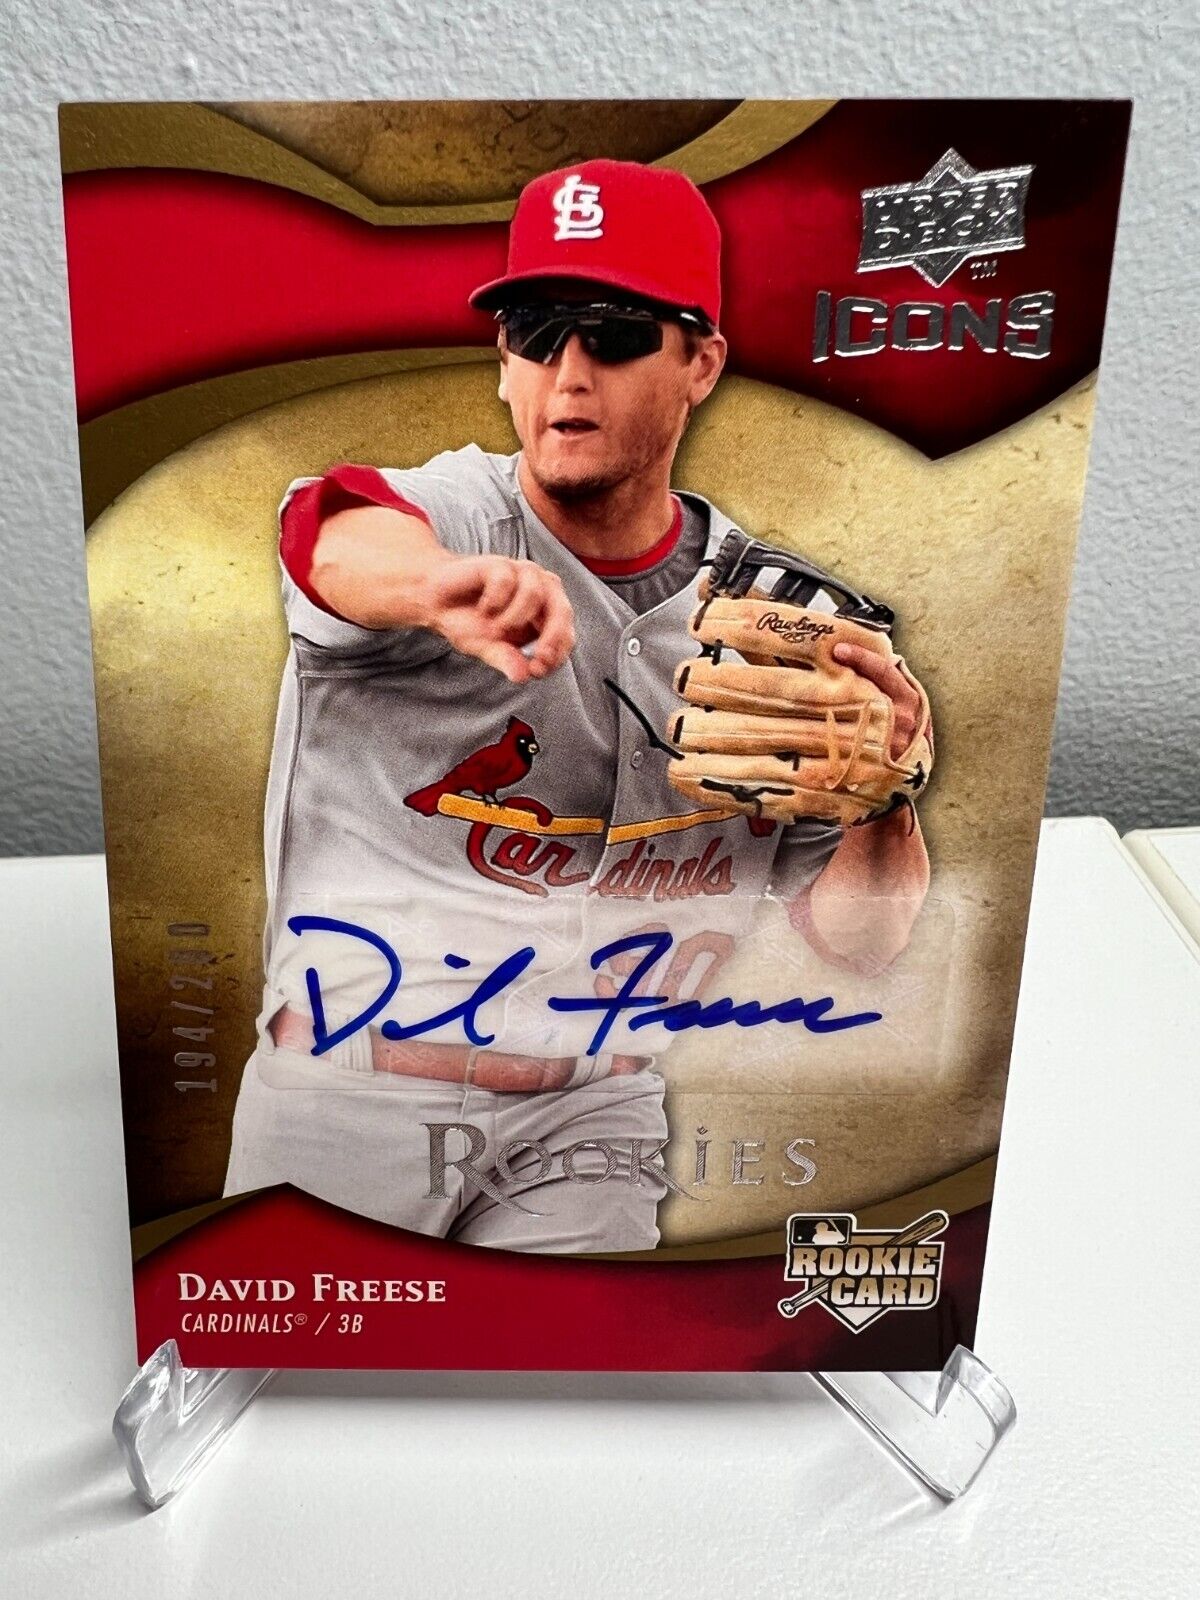 2009 UPPER DECK ICONS DAVID FREESE AUTO ROOKIE RC CARDINALS /200 RED